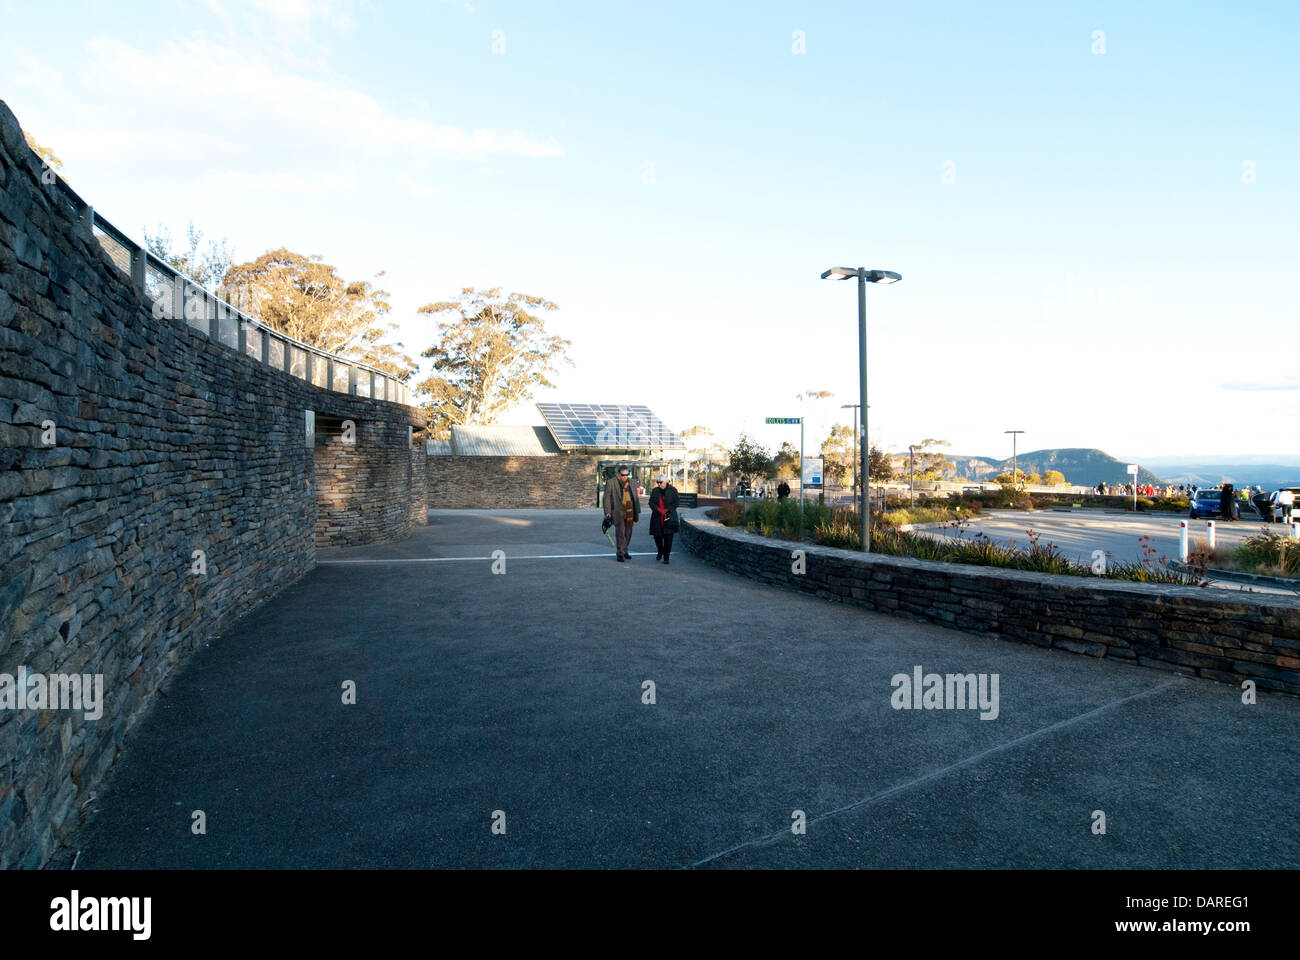 The curved stone wall of the public toilet facilities at Echo Point, Katoomba, New South Wales, Australia Stock Photo